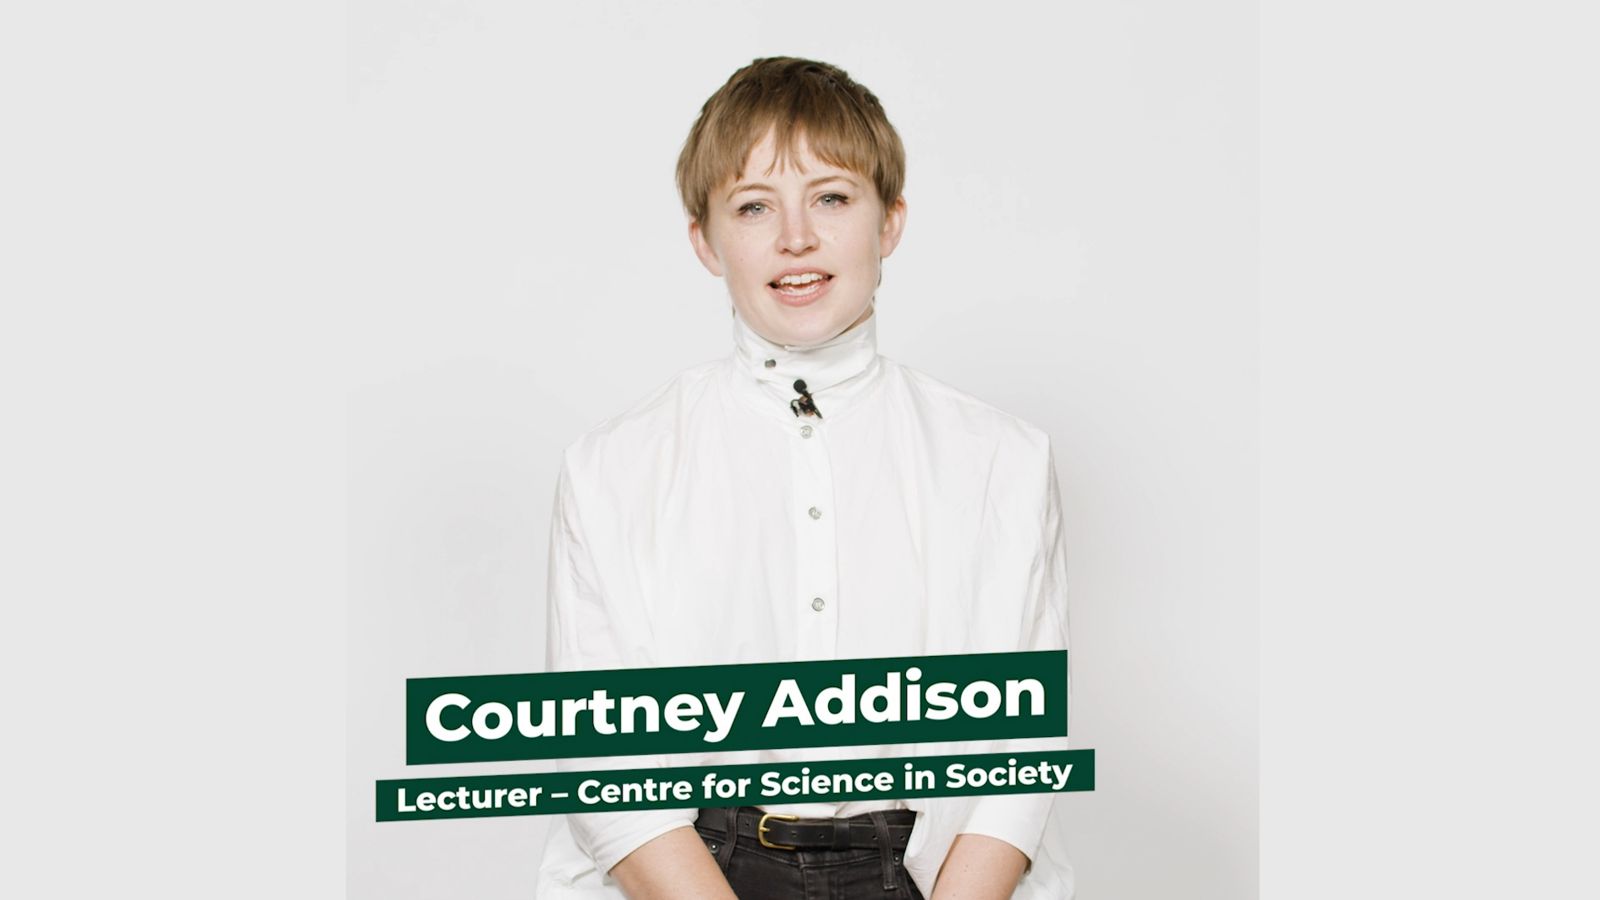 Lecturer Courtney Addison stands facing the camera against a white background